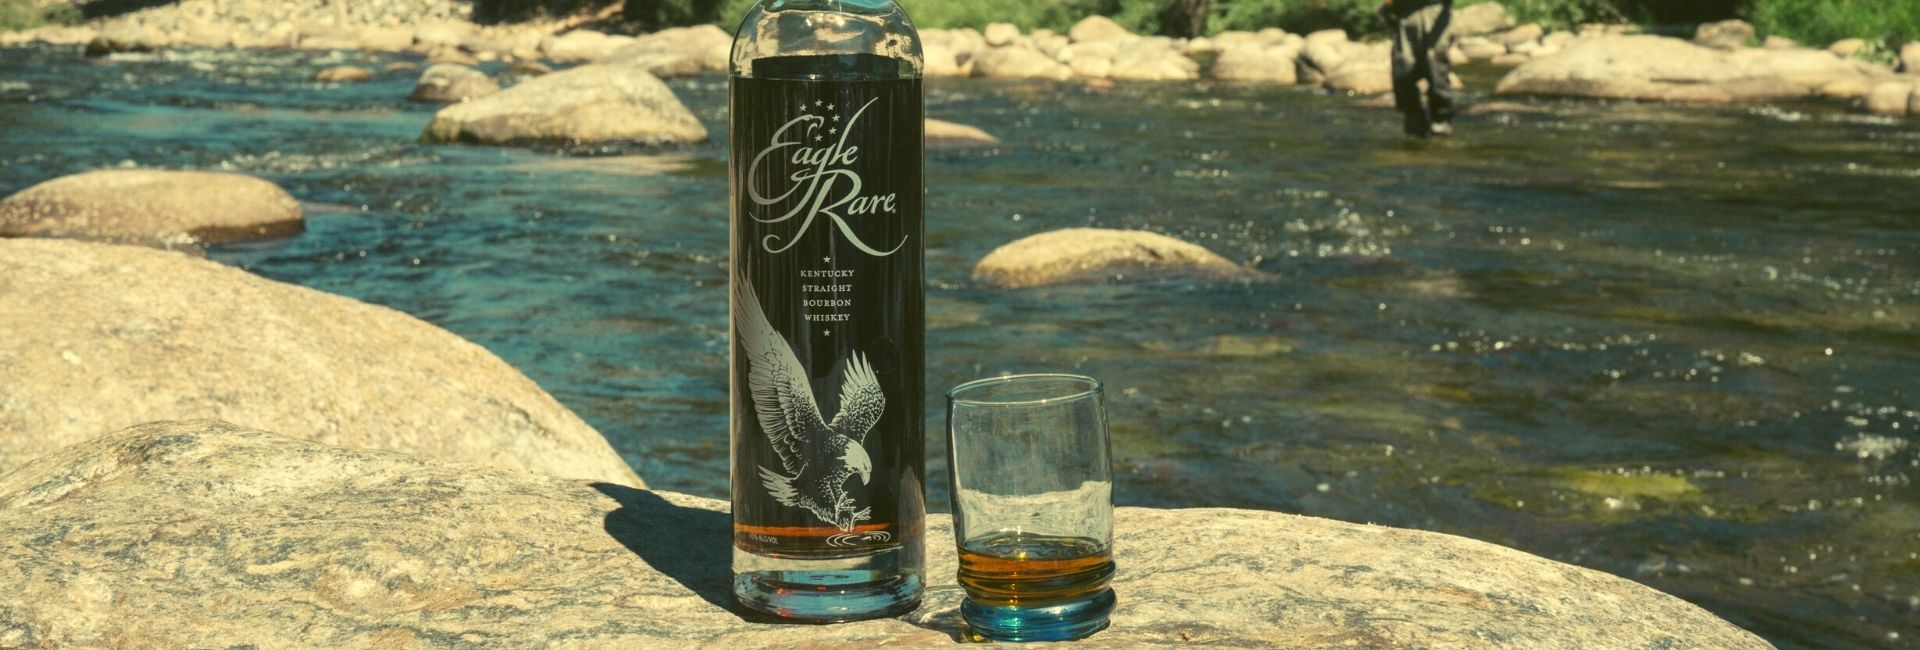 Eagle Rare 10-year Bourbon review